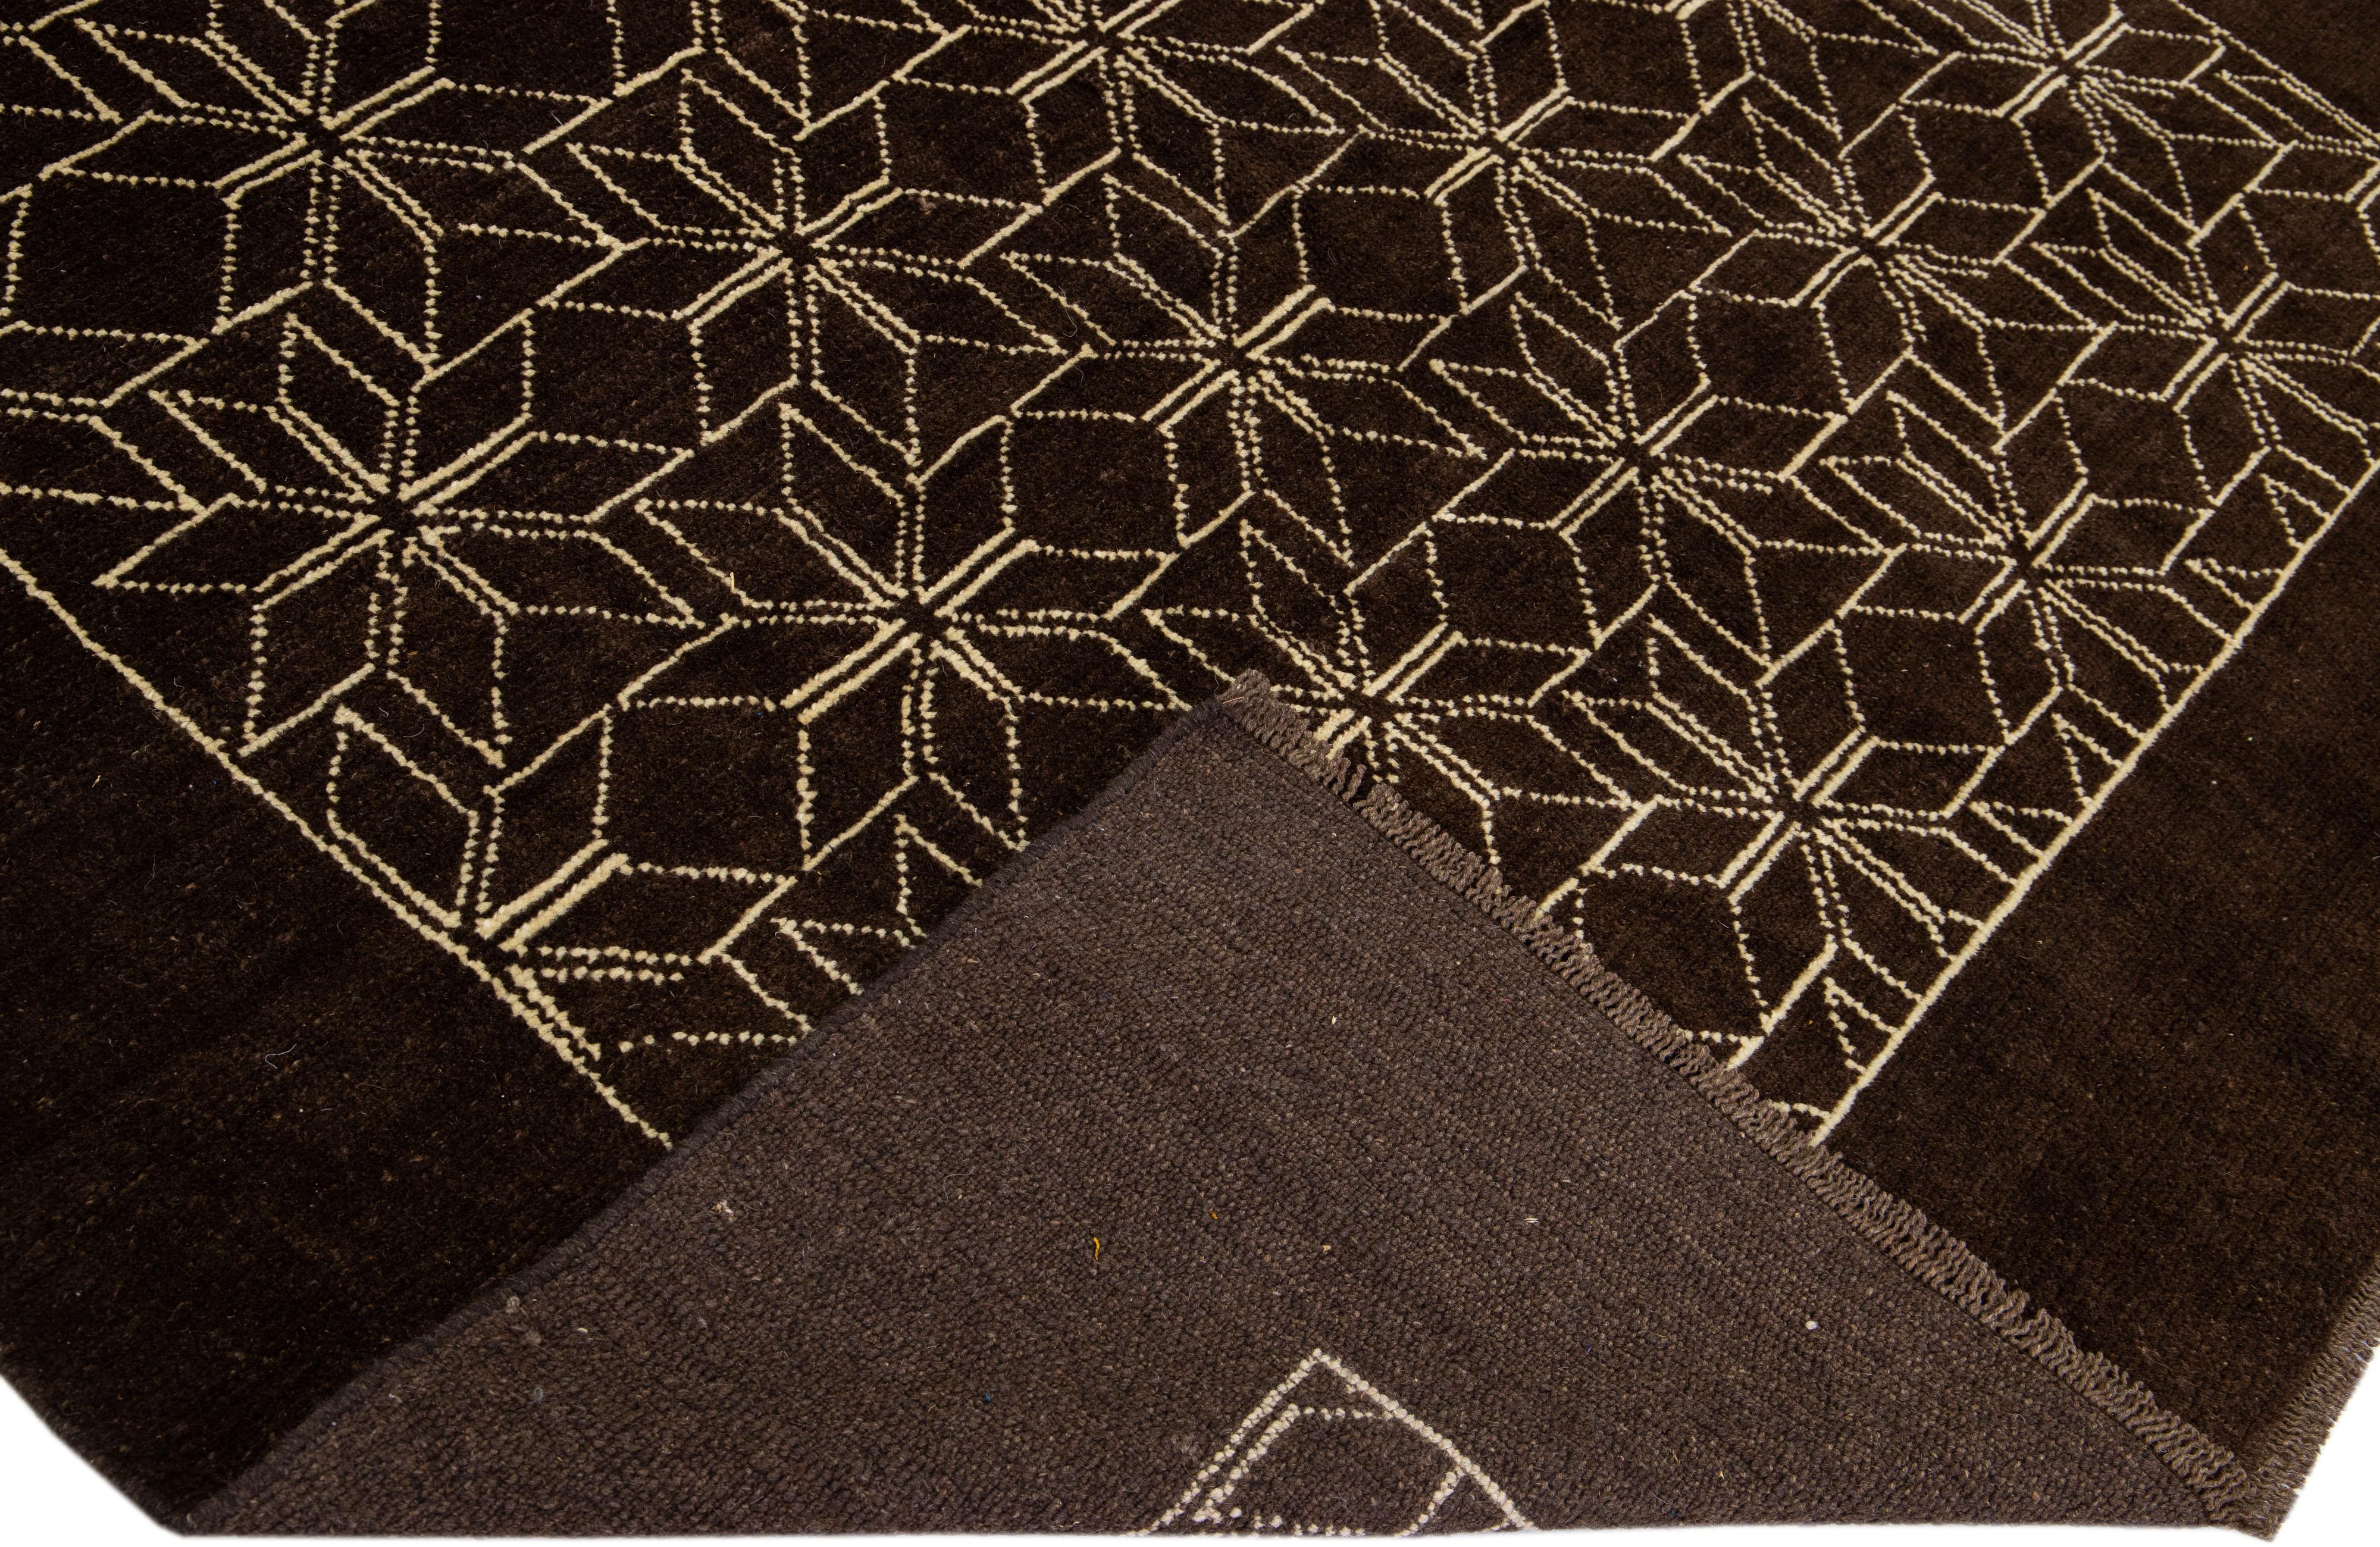 This Beautiful Moroccan-style handmade wool rug makes part of our Northwest collection and features a dark brown color field and beige accents in a gorgeous geometric tribal design.

This rug measures: 7' x 8'11